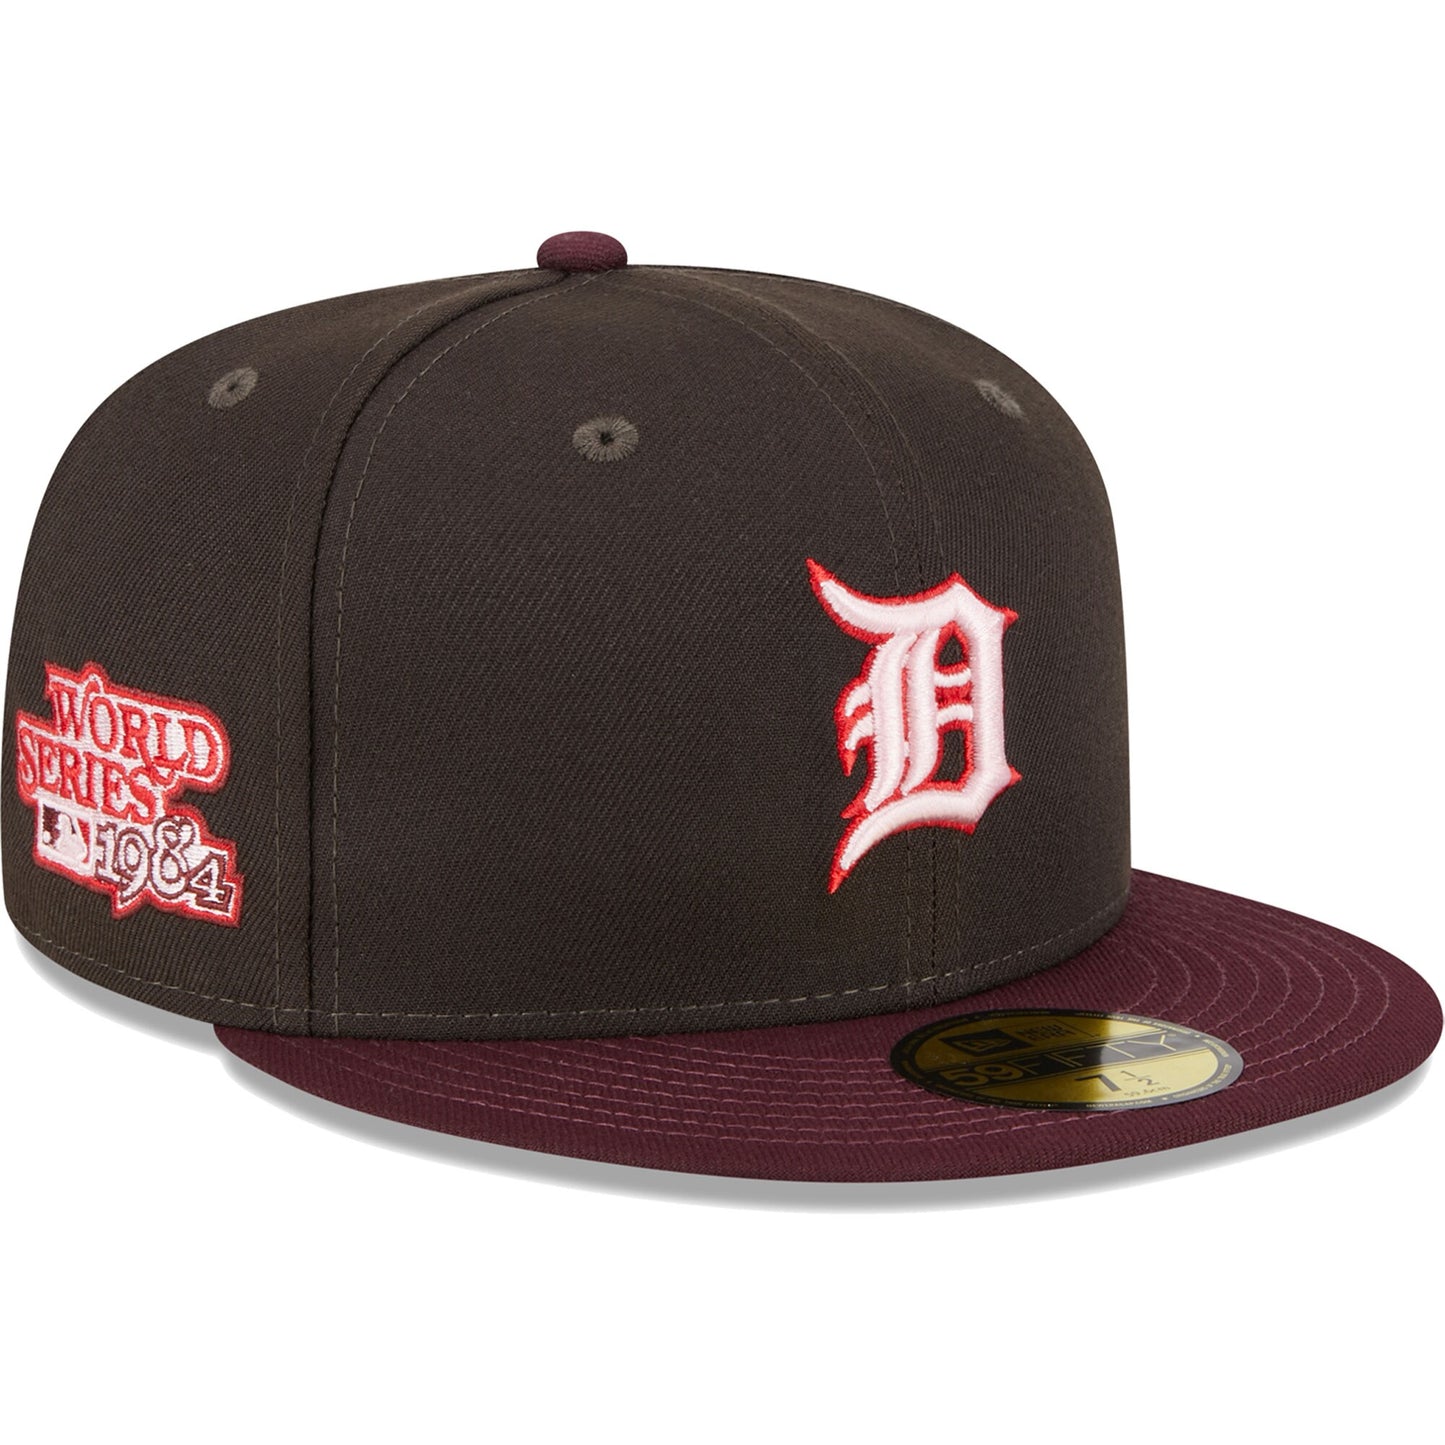 Detroit Tigers New Era Chocolate Strawberry 59FIFTY Fitted Hat - Brown/Maroon